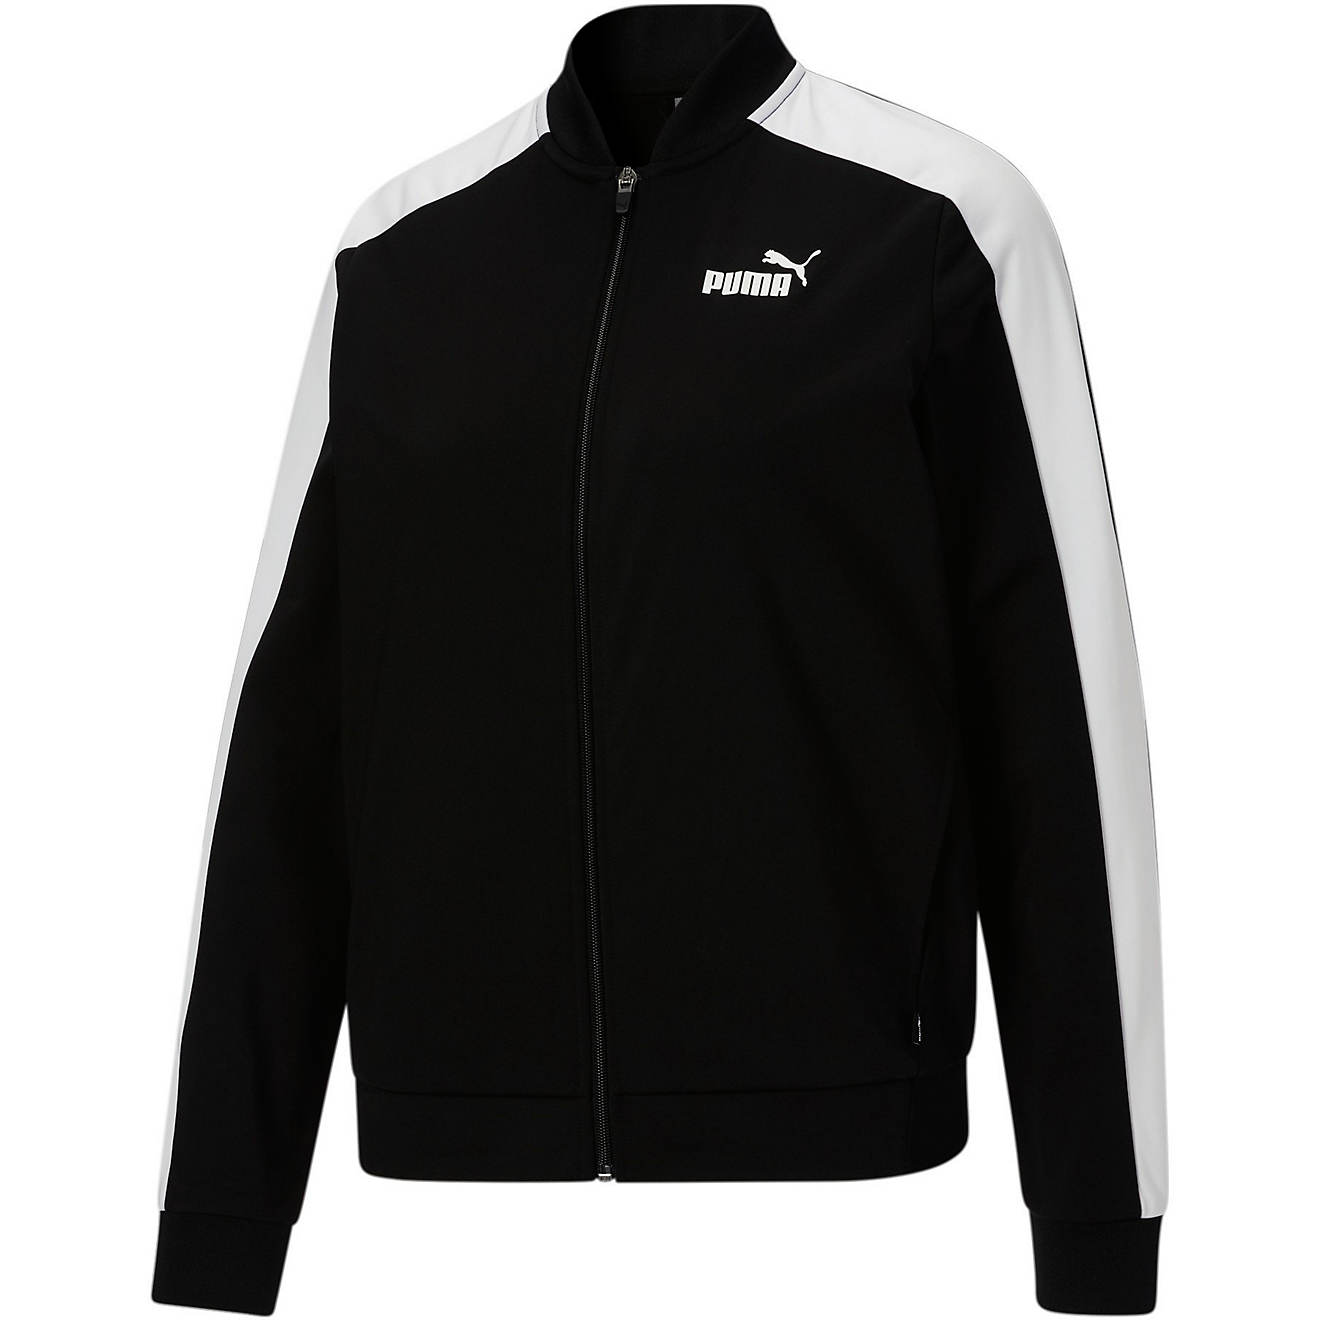 Puma Women's Tricot Jacket | Free Shipping at Academy